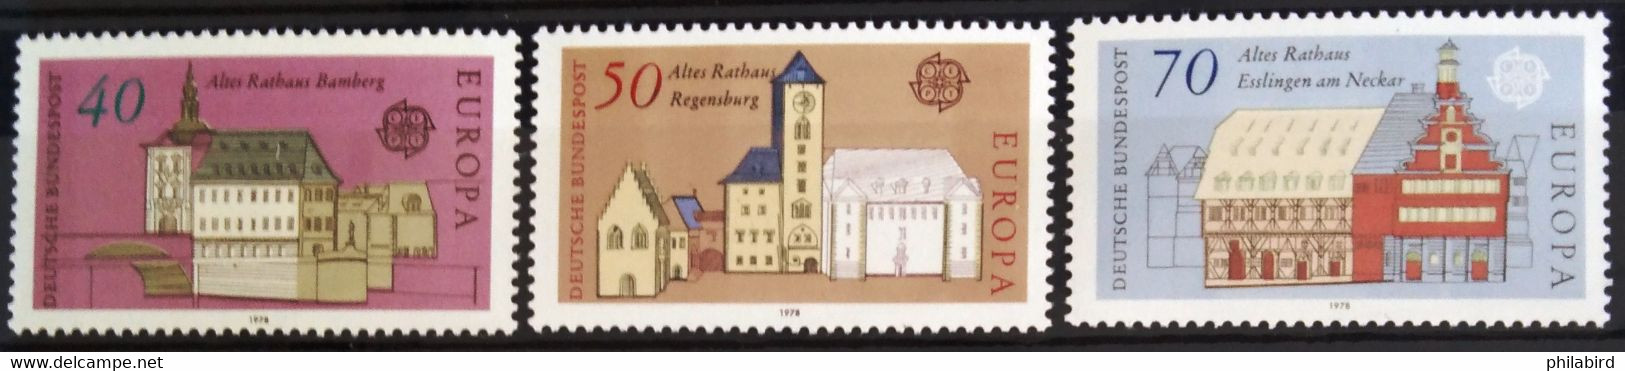 EUROPA 1978 - ALLEMAGNE                    N° 816/818                        NEUF** - 1978